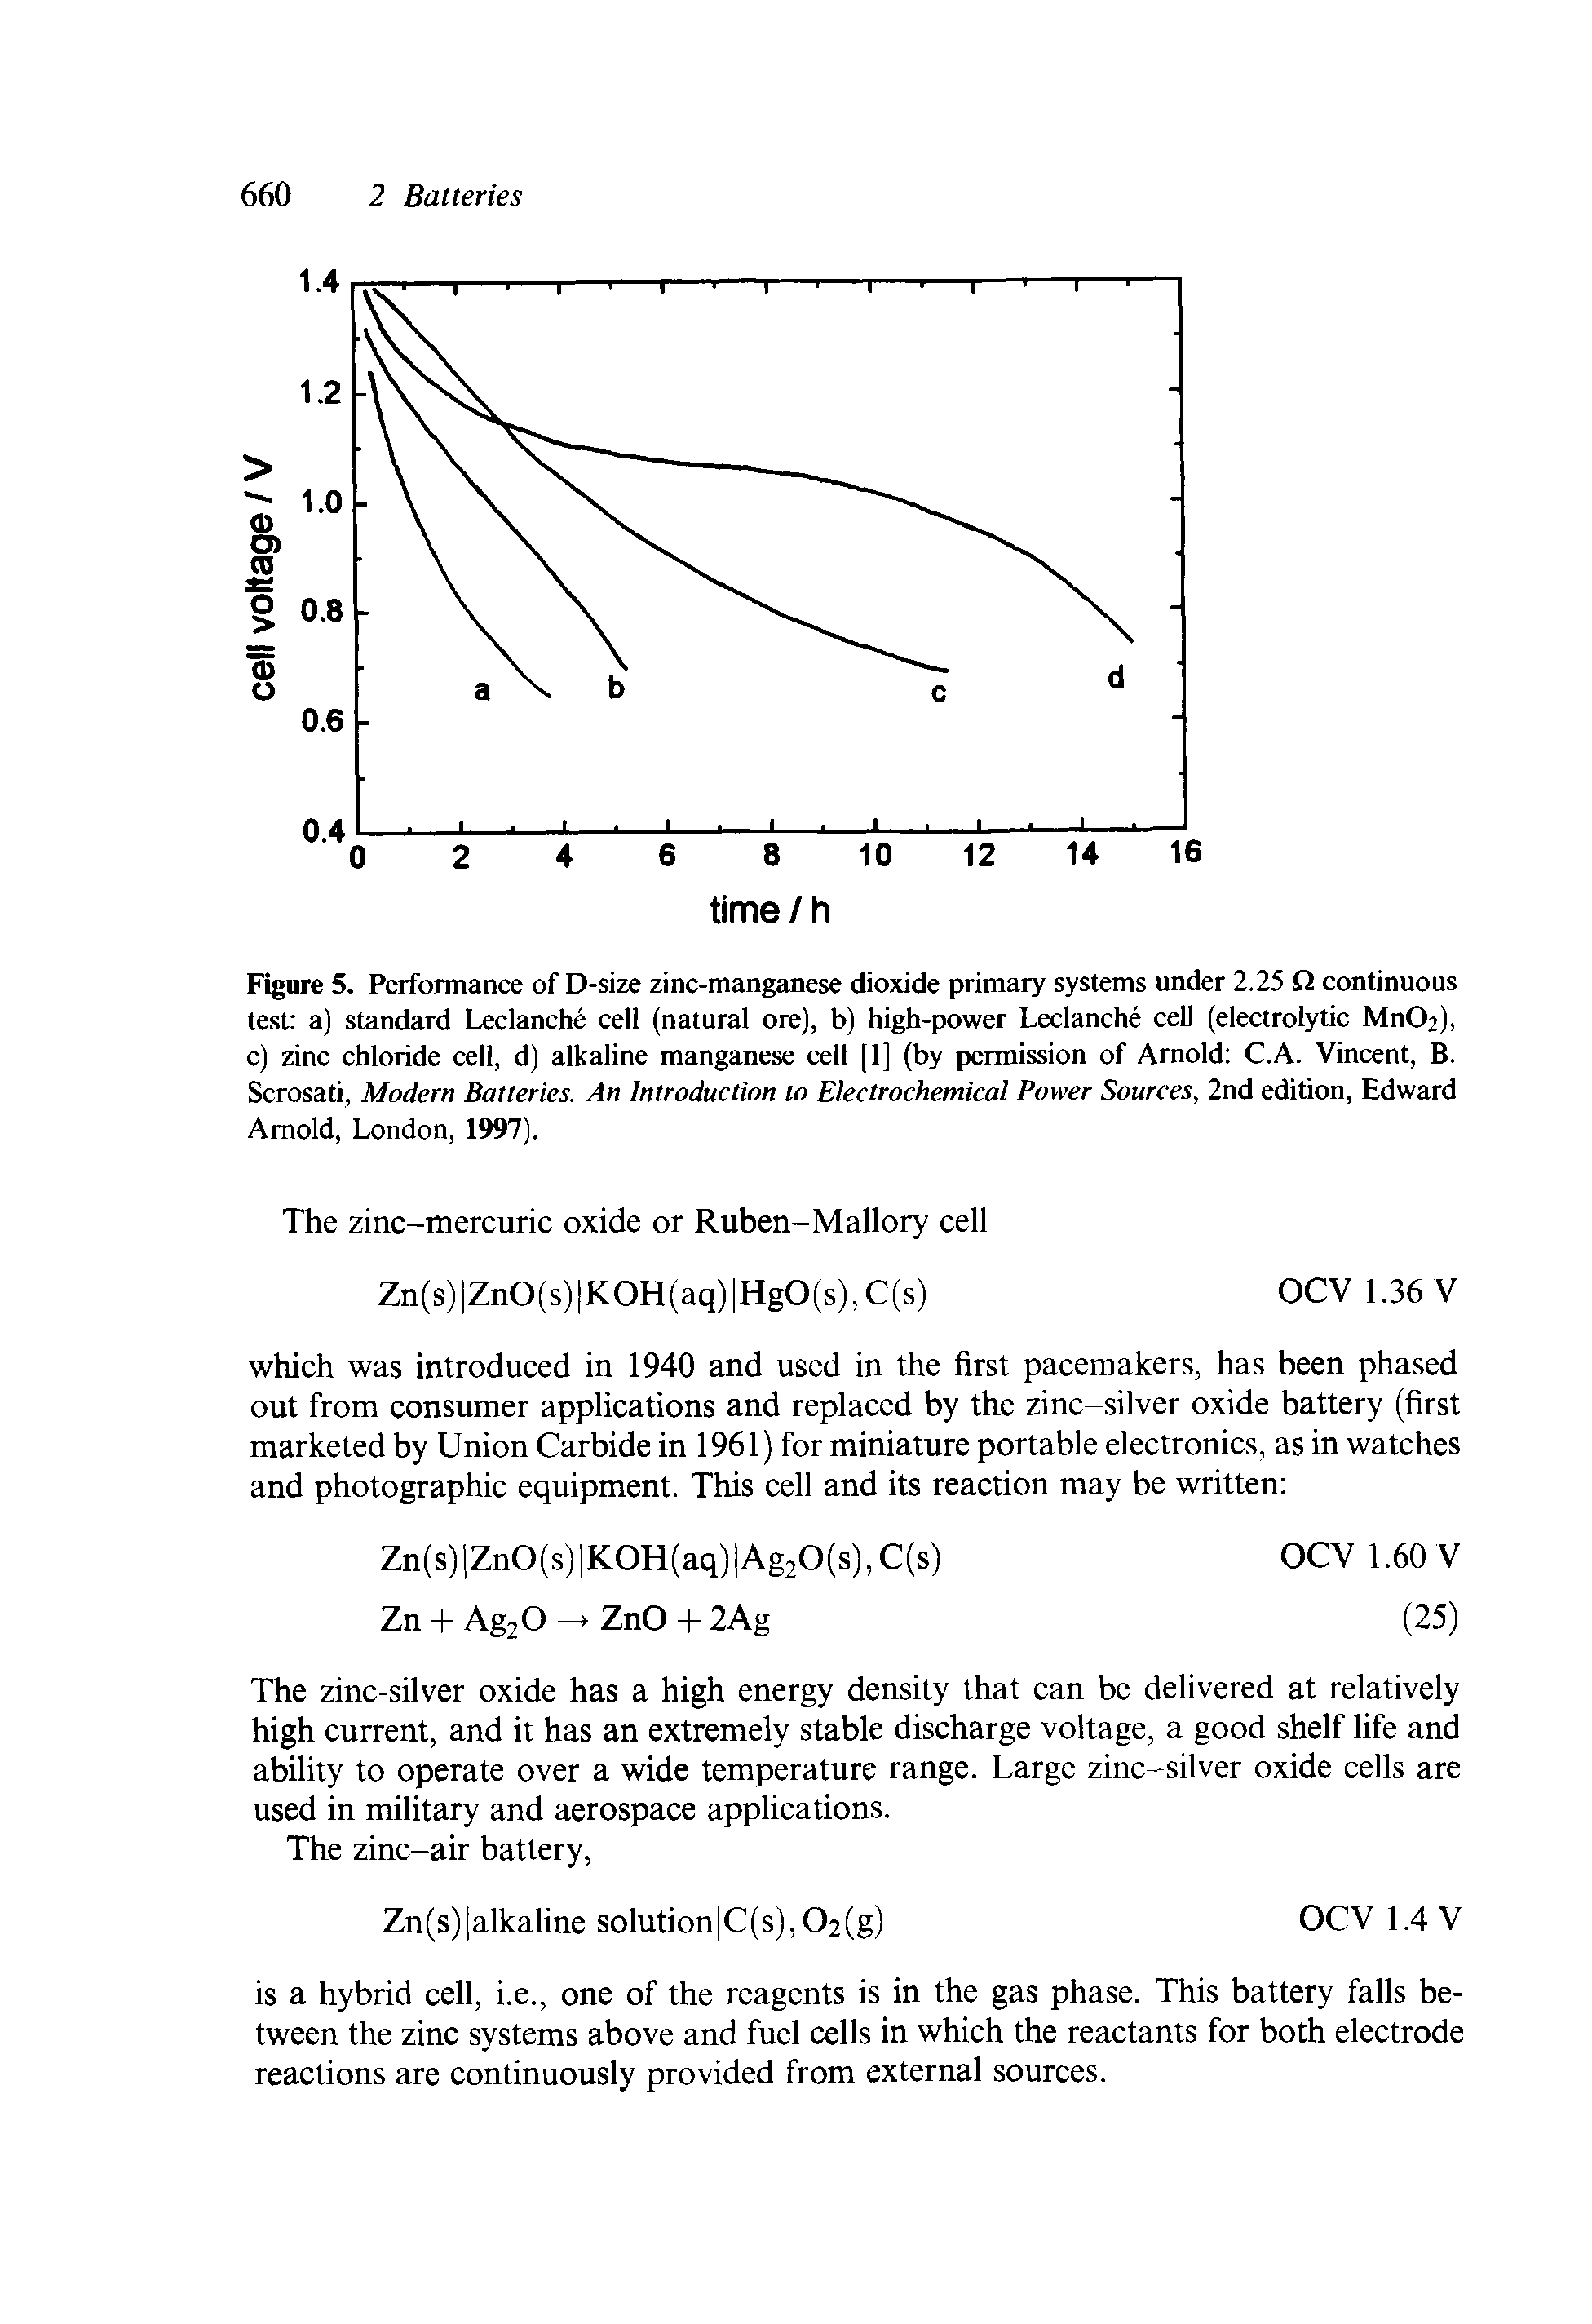 Figure 5. Performance of D-size zinc-manganese dioxide primary systems under 2.25 Q continuous test a) standard Leclanche cell (natural ore), b) high-power Leclanche cell (electrolytic MnOa), c) zinc chloride cell, d) alkaline manganese cell [1] (by permission of Arnold C.A. Vincent, B. Scrosati, Modern Batteries. An Introduction to Electrochemical Power Sources, 2nd edition, Edward Arnold, London, 1997).